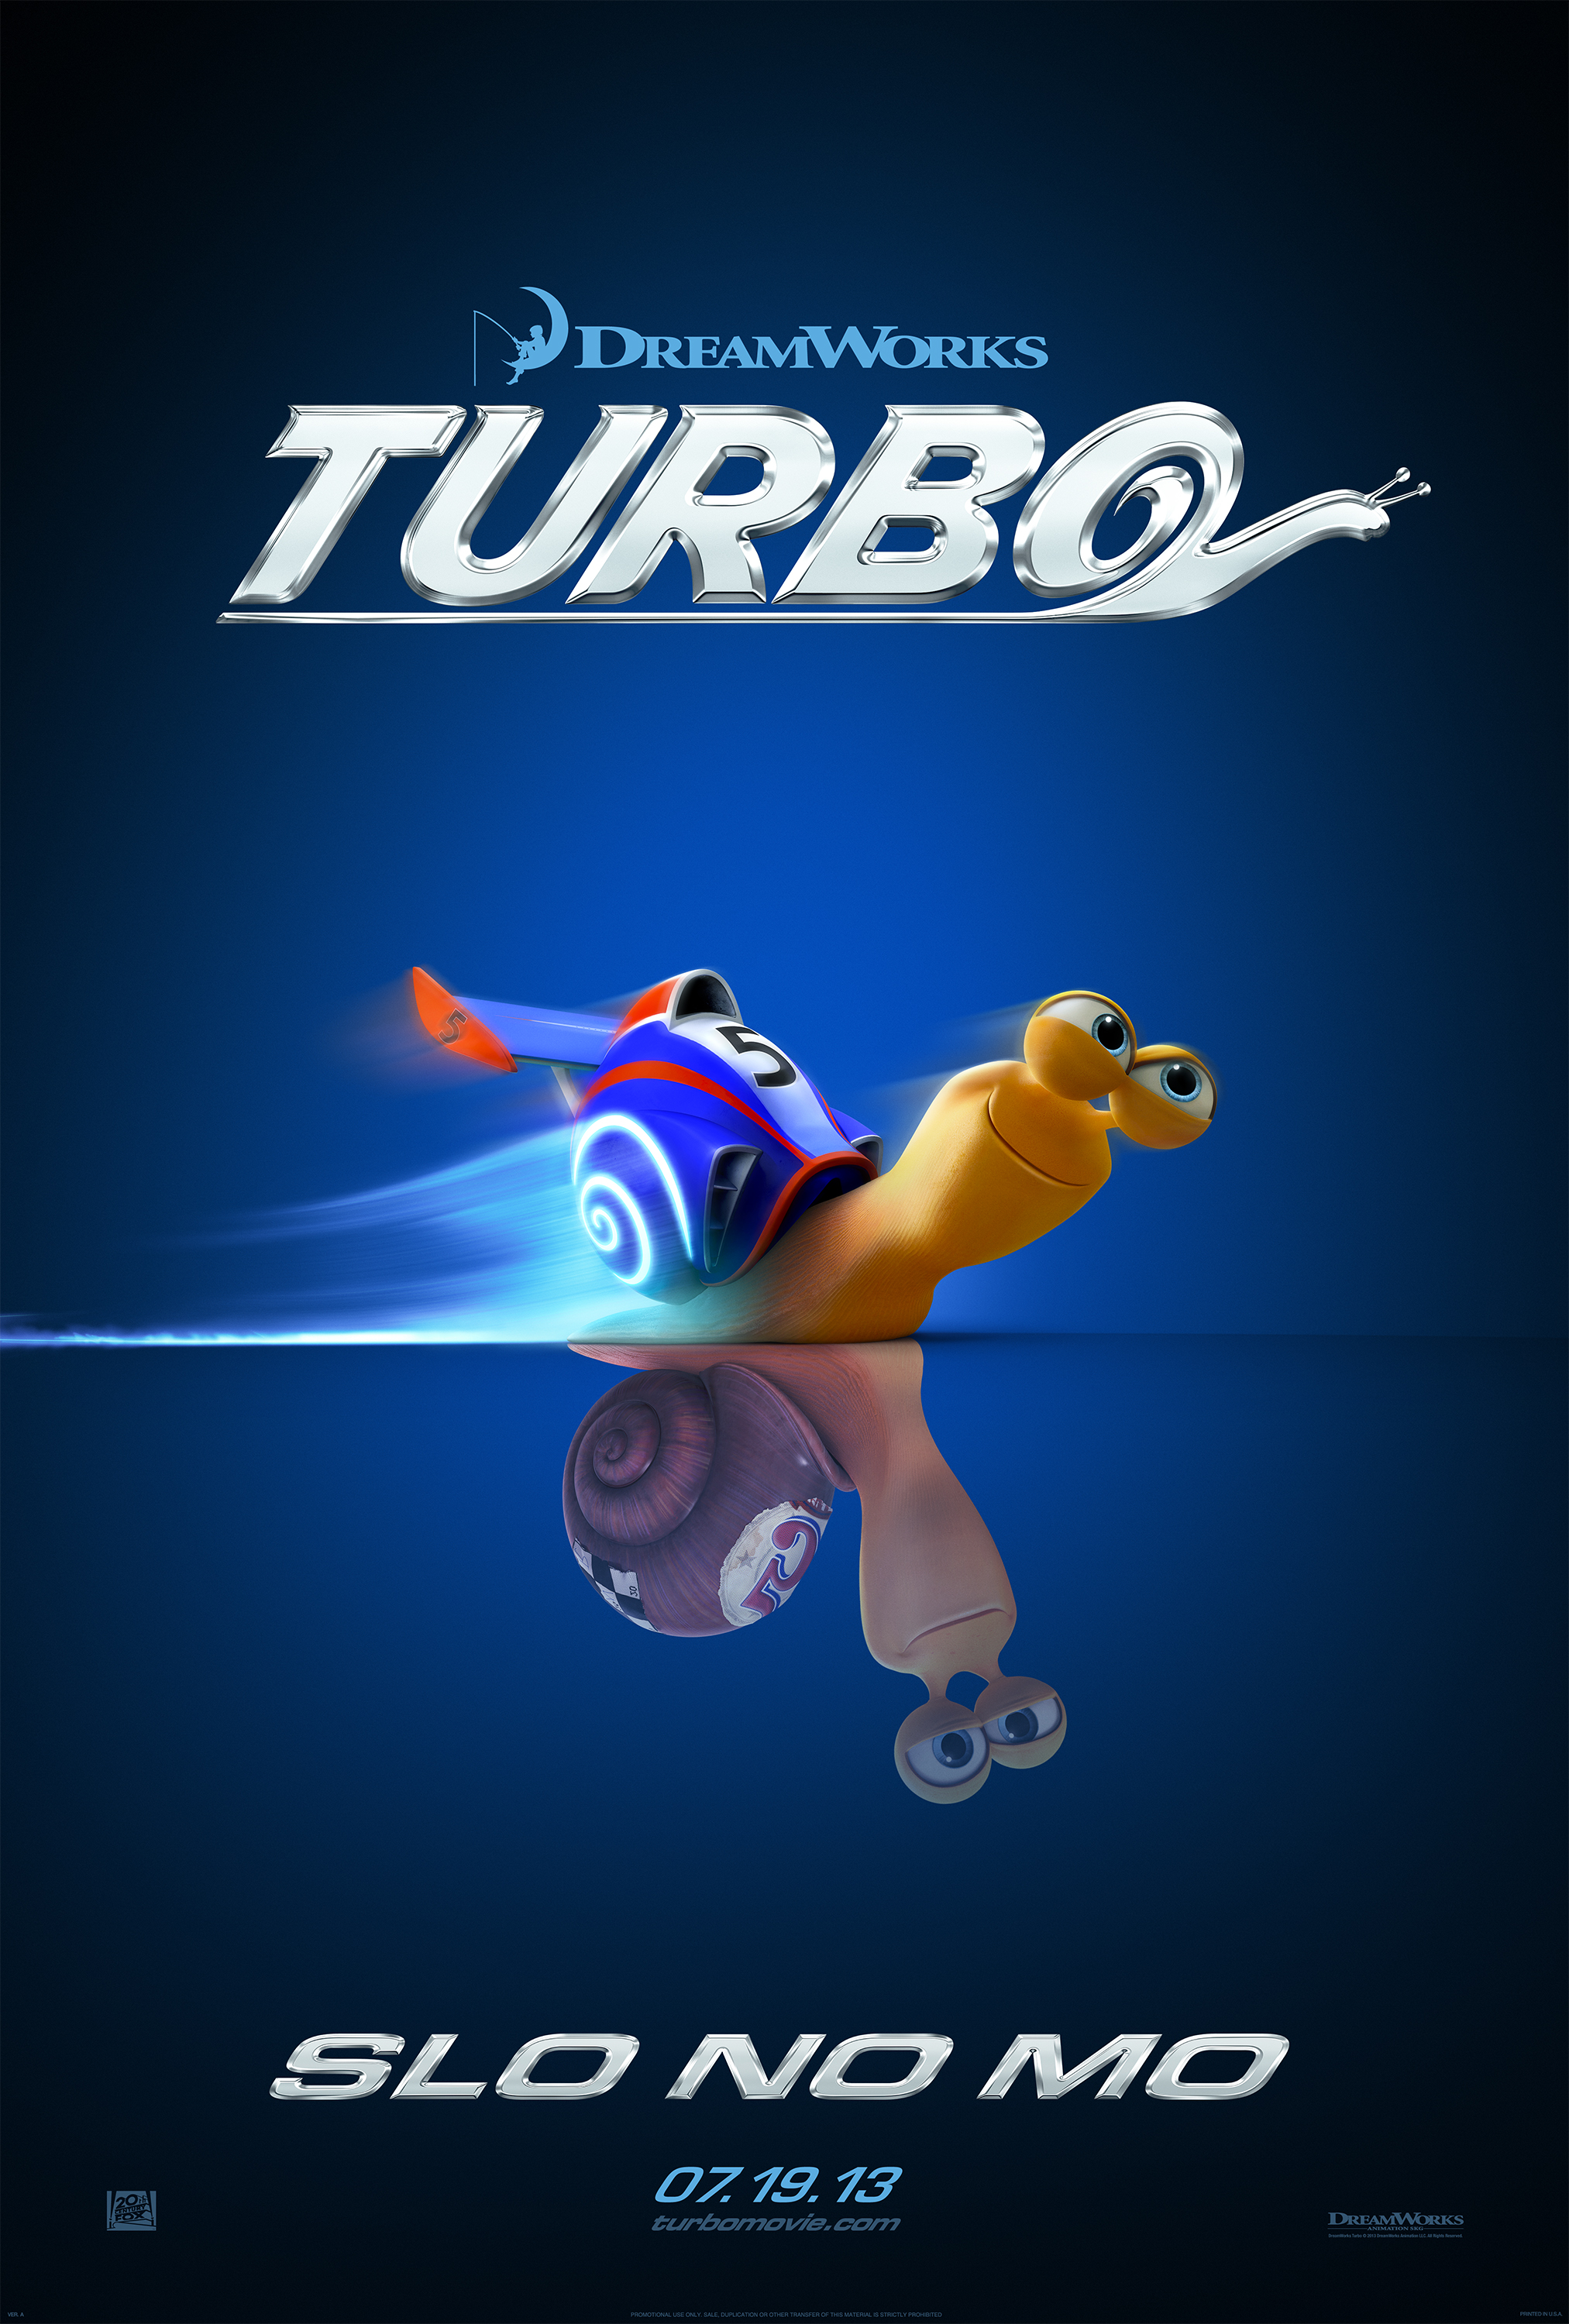 First Look: Dreamworks ‘Turbo’ Starring Ryan Reynolds (Poster and ...